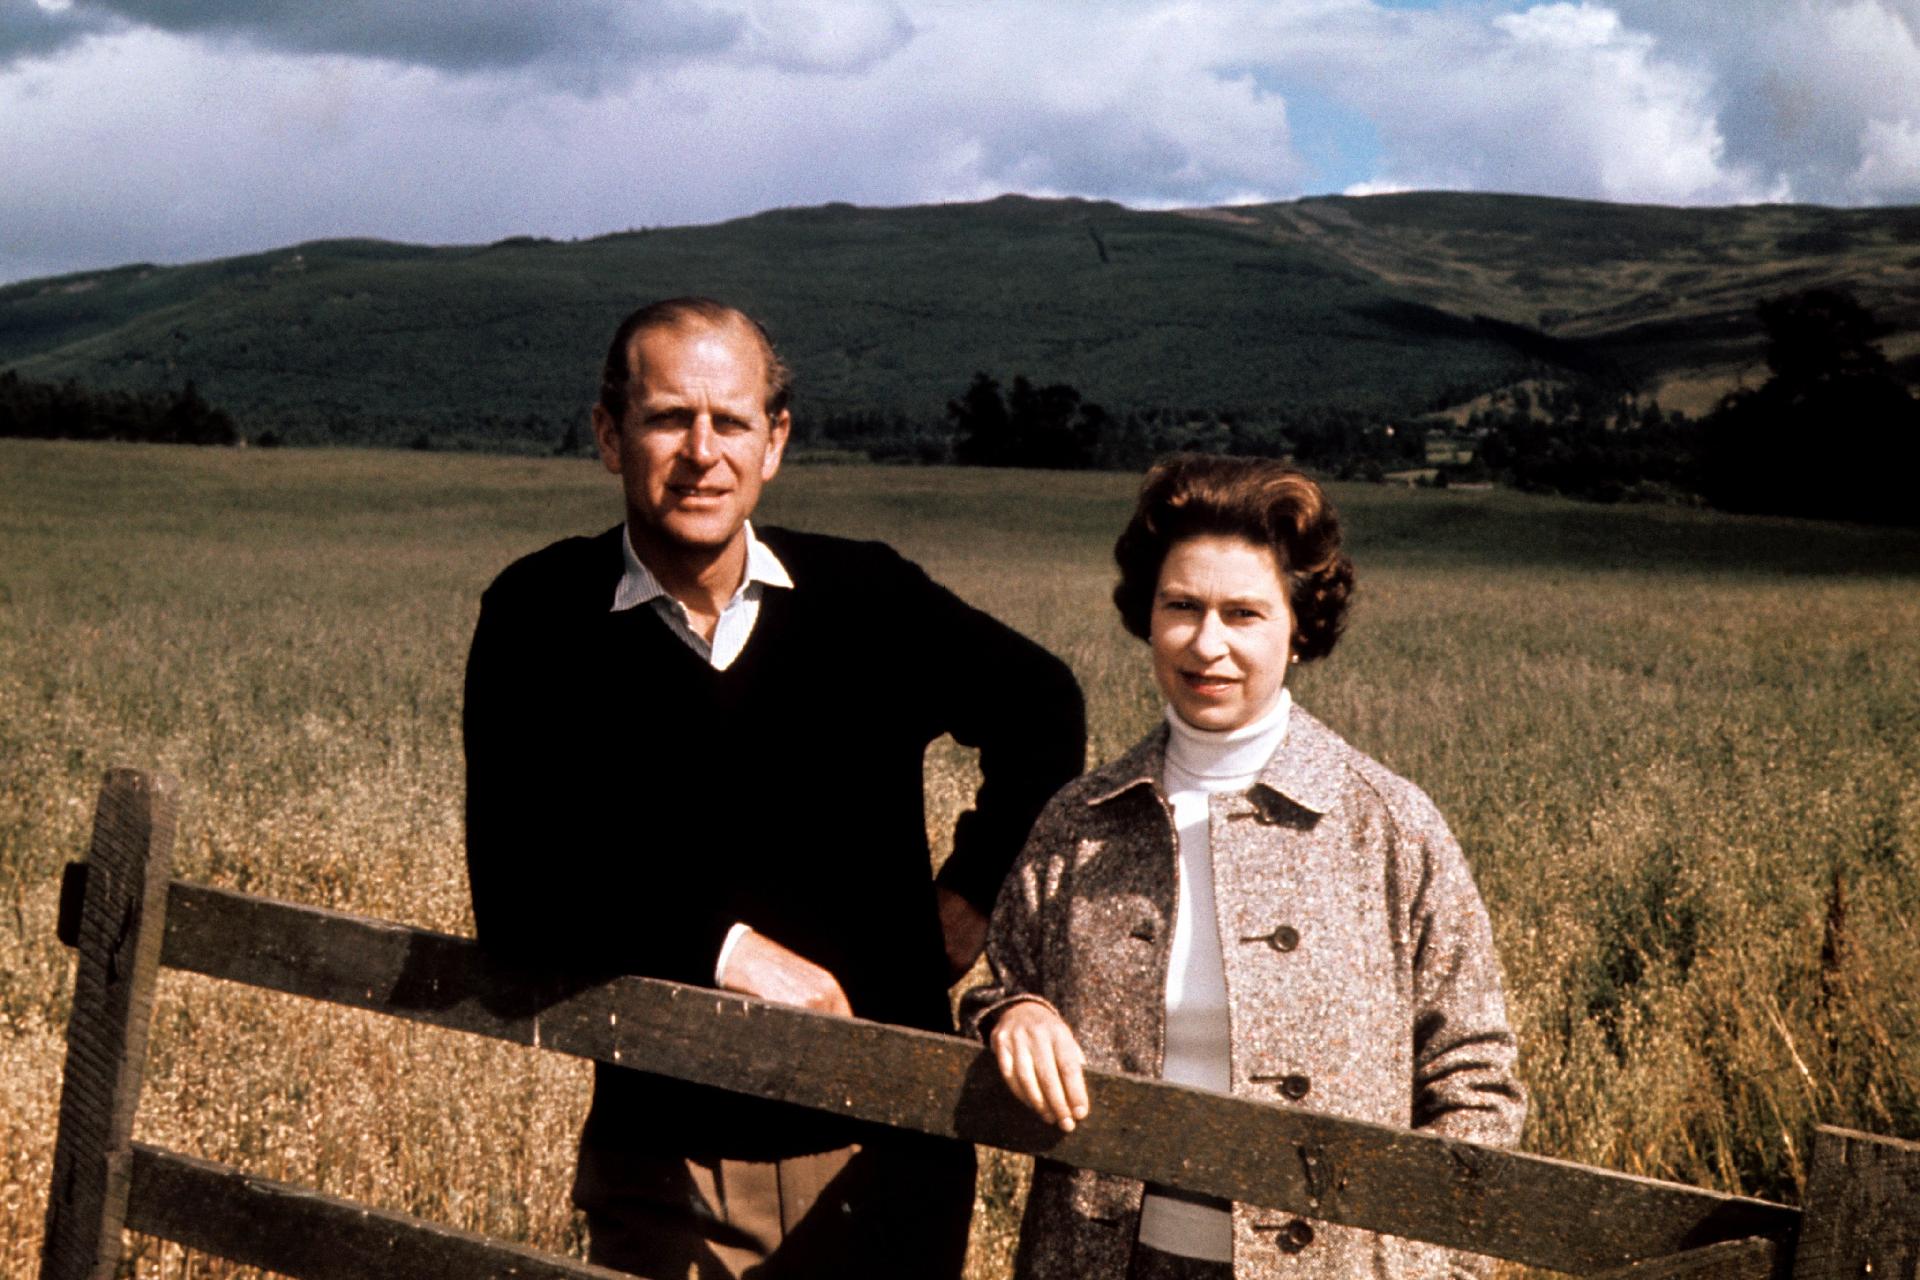 Queen Elizabeth and Prince Philip visit Balmoral - Reproduction / Royal UK